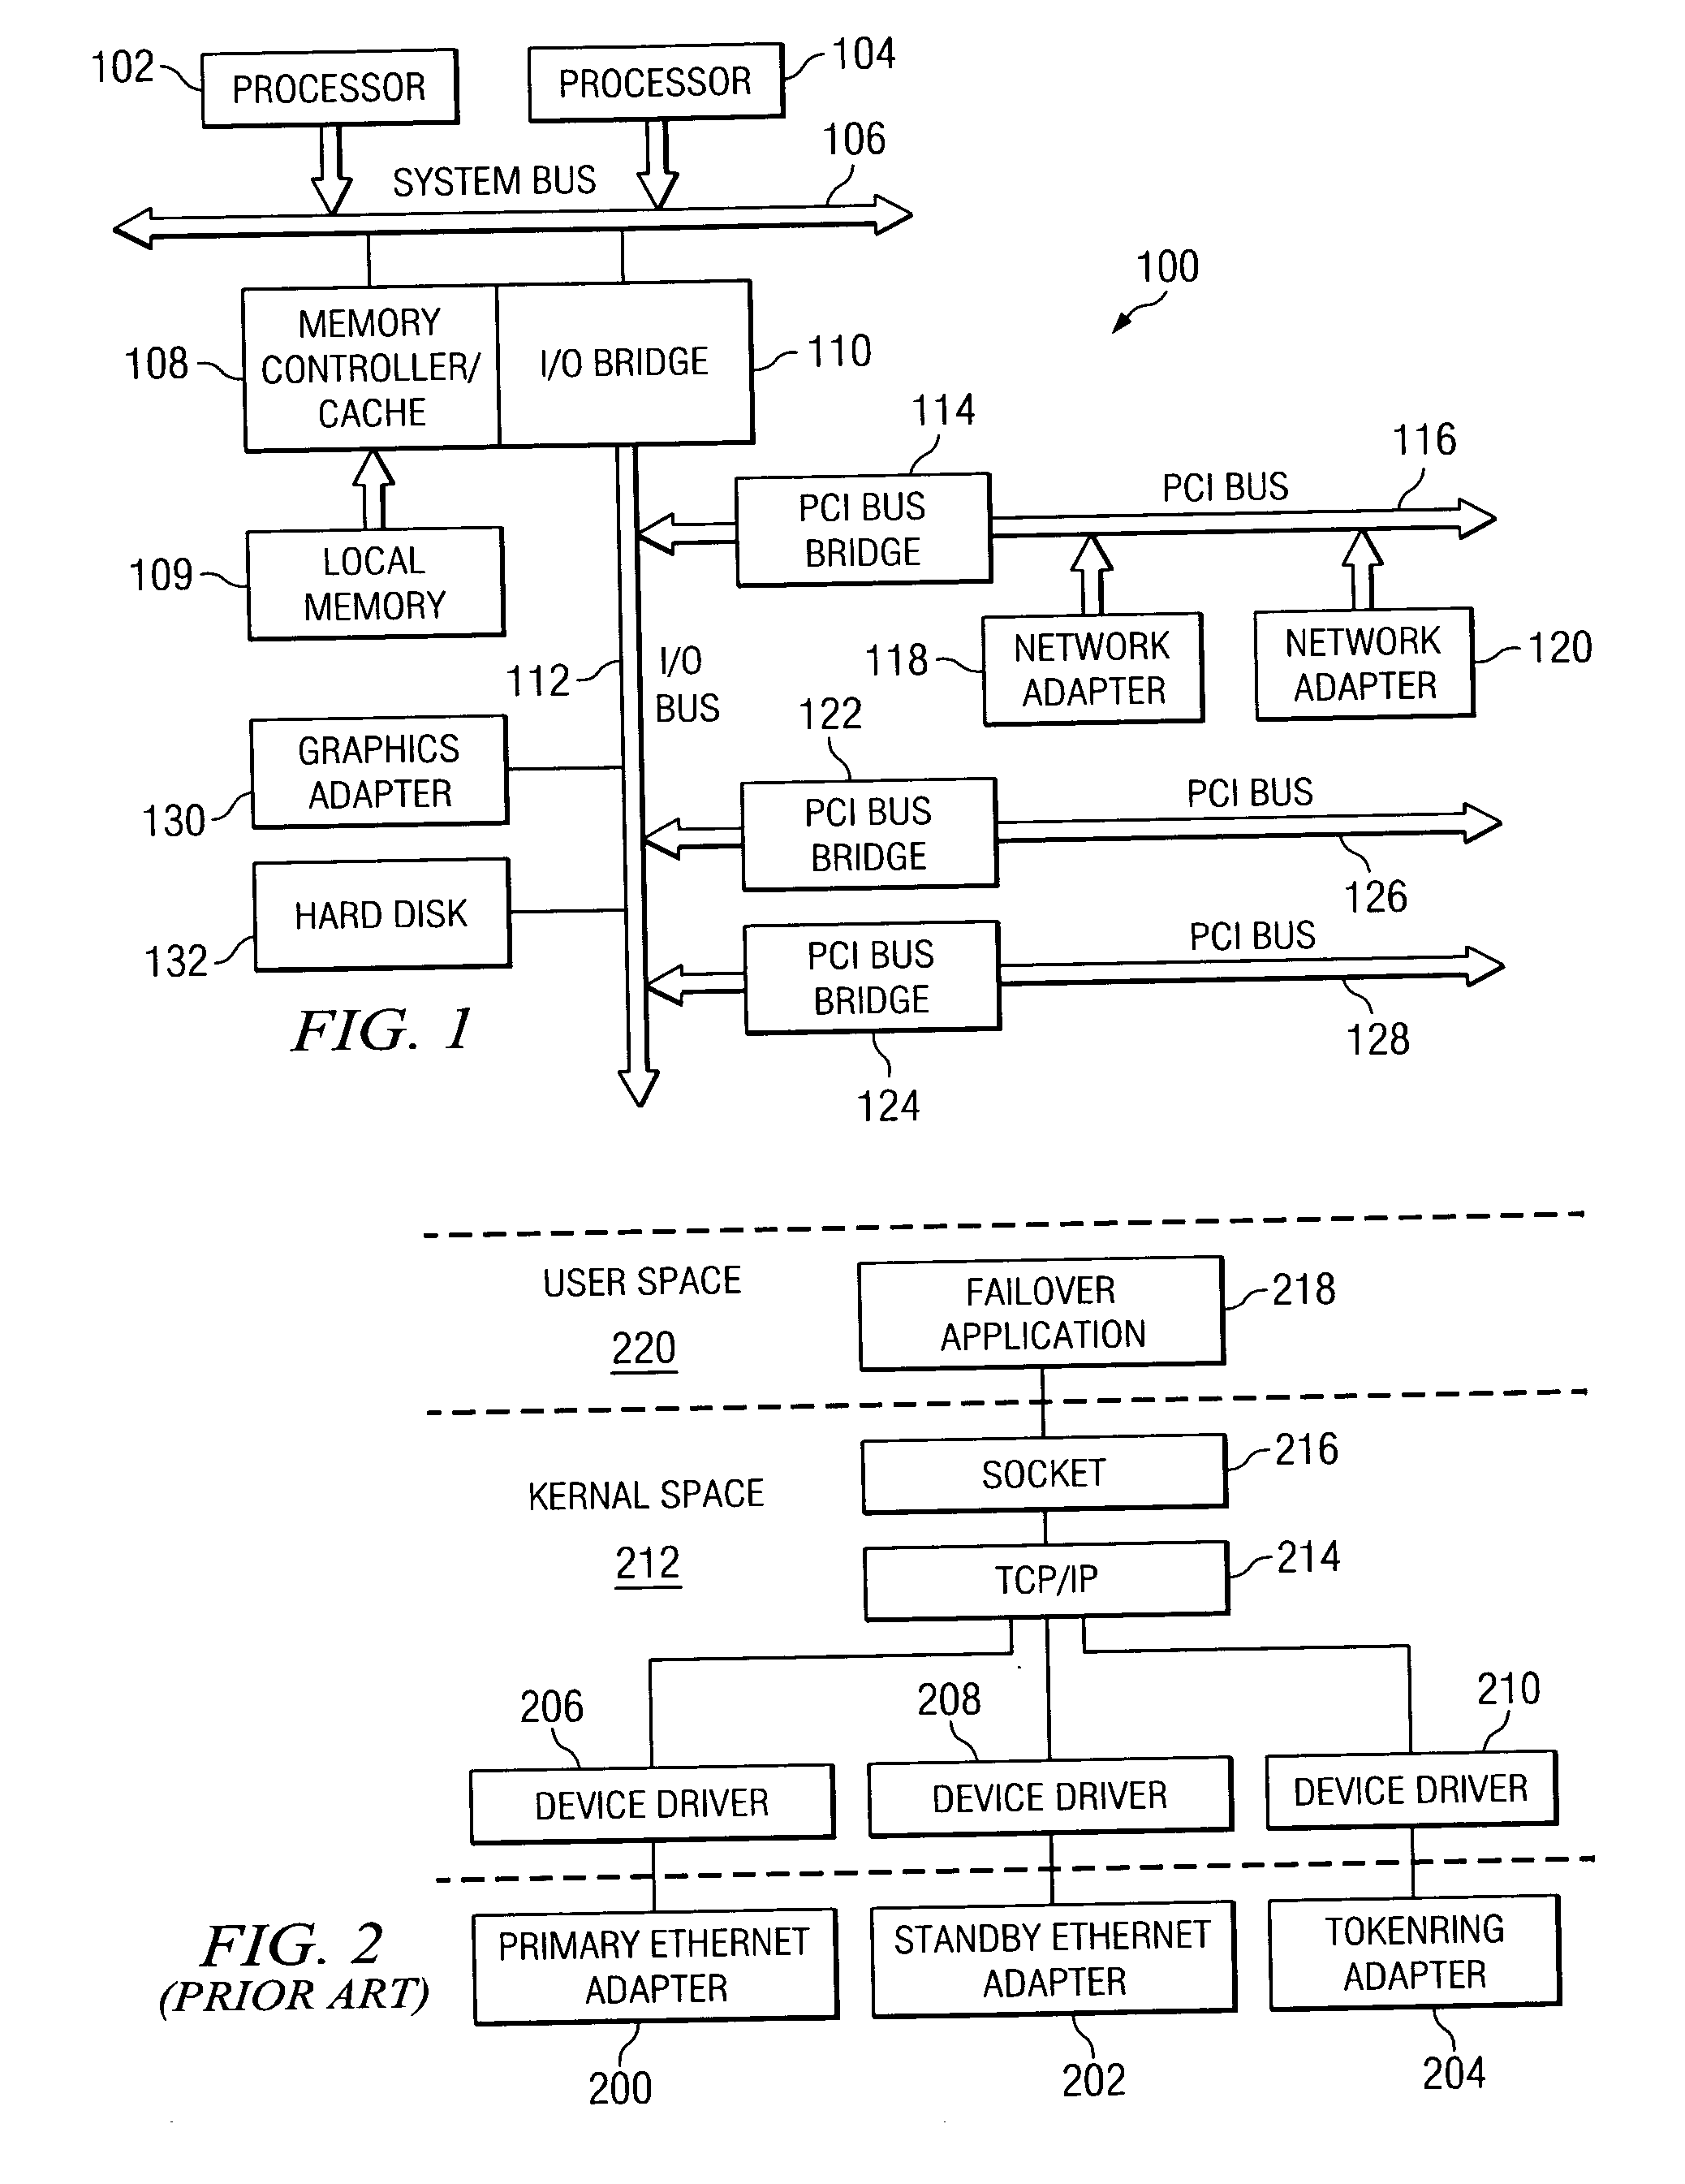 Method and apparatus for managing adapters in a data processing system